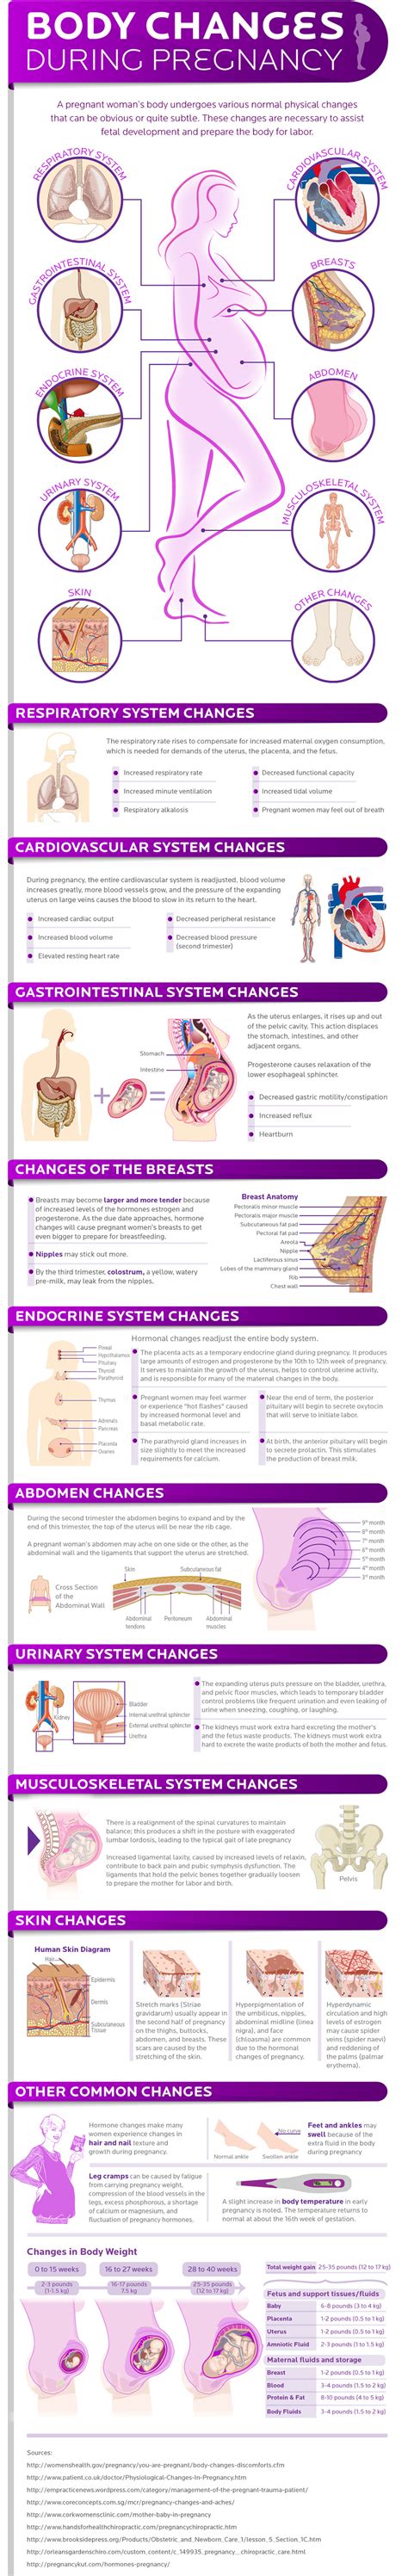 How A Woman S Body Changes During Pregnancy Infographic